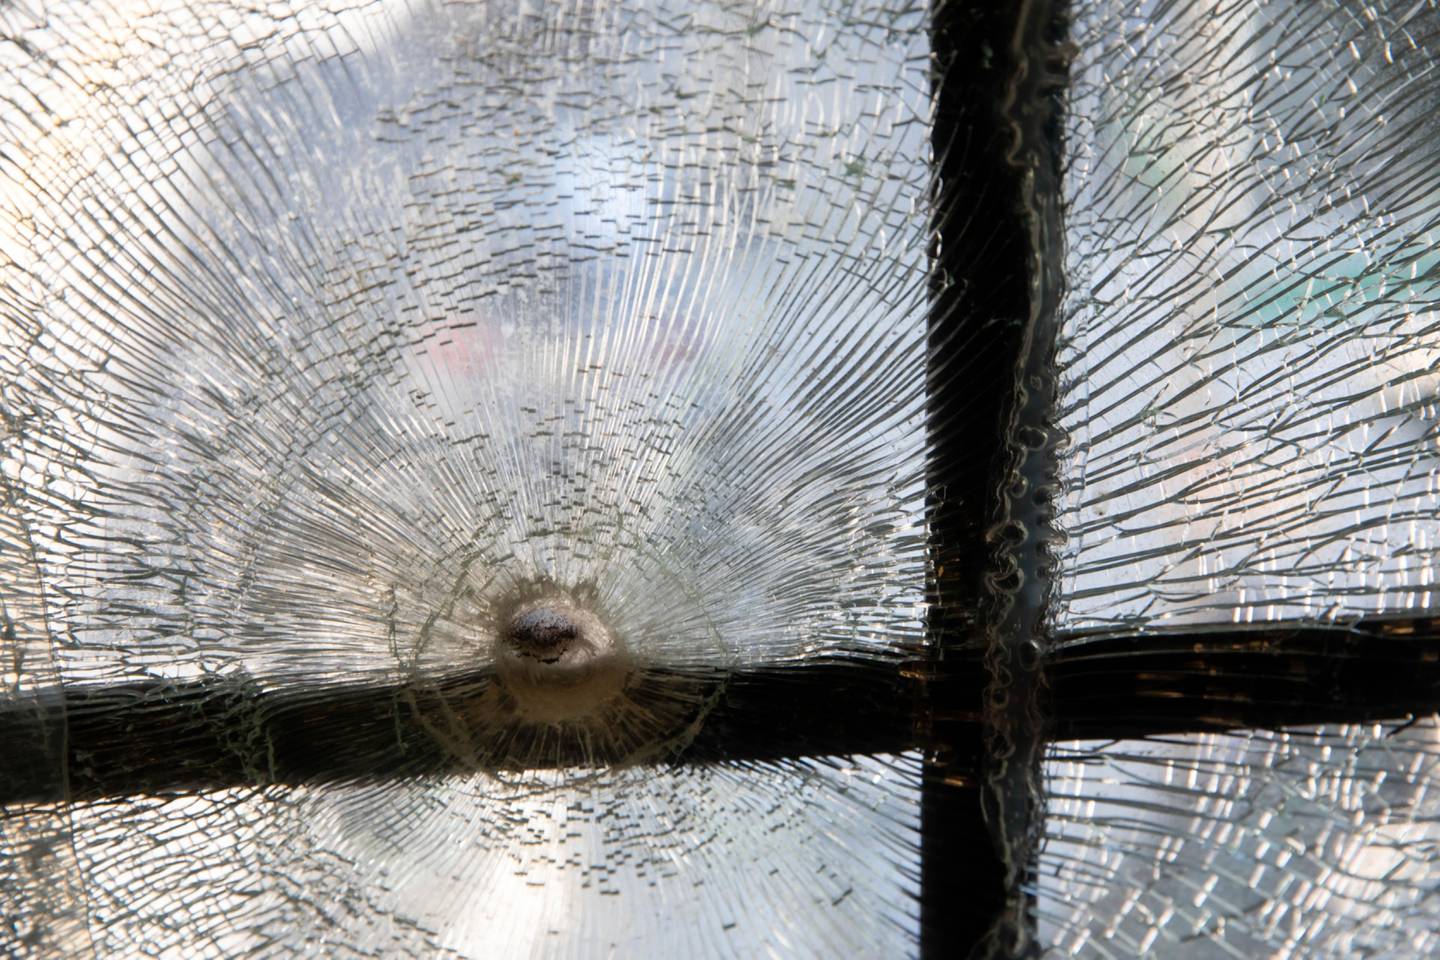 A bullet hole in a shattered window.